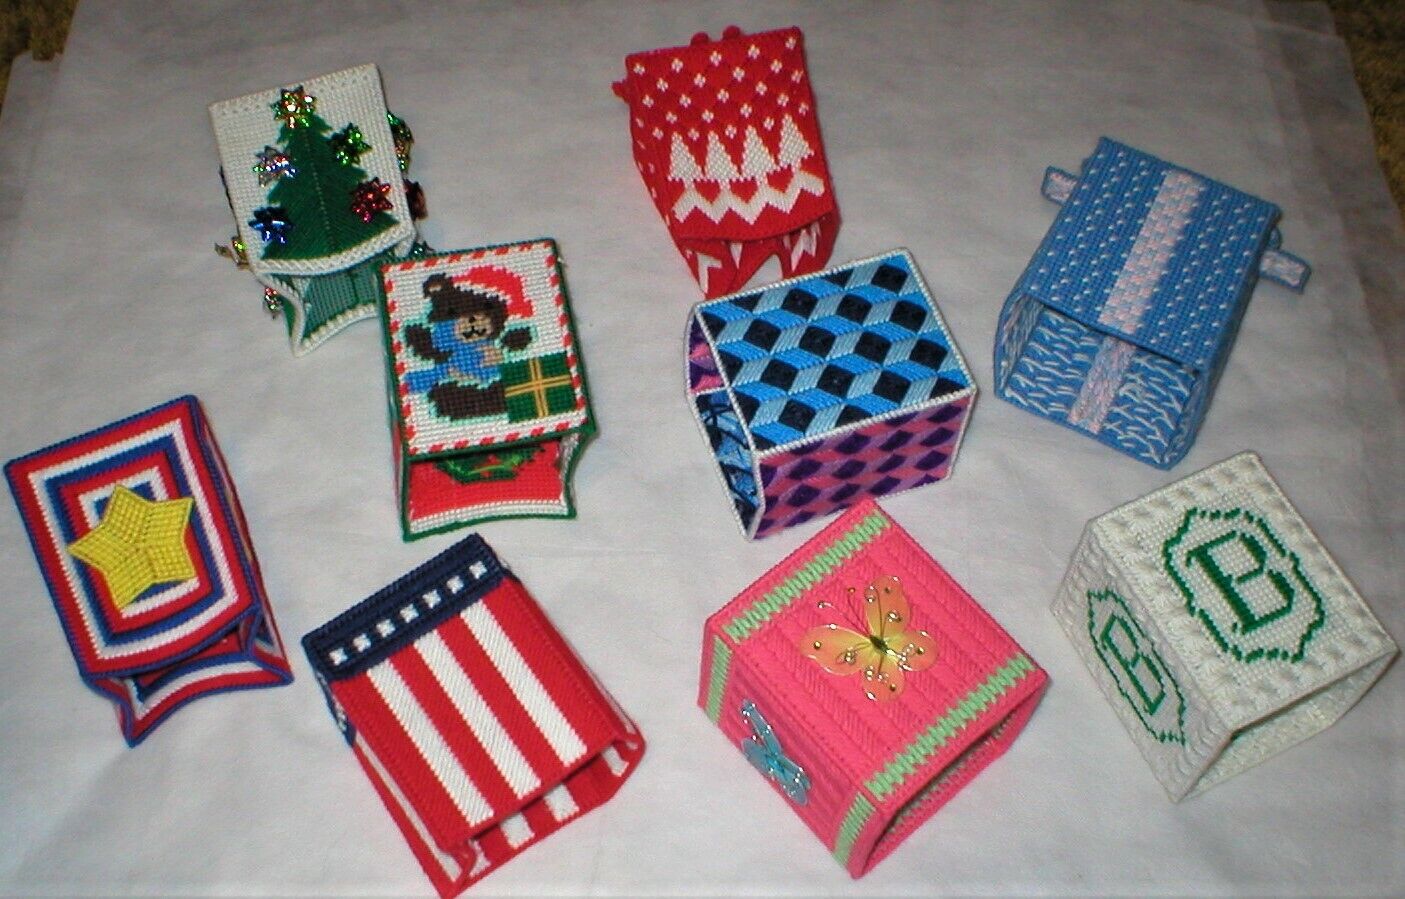 9 Tissue Box Covers Plastic Canvas Completed Lot Sold As Is As Shown